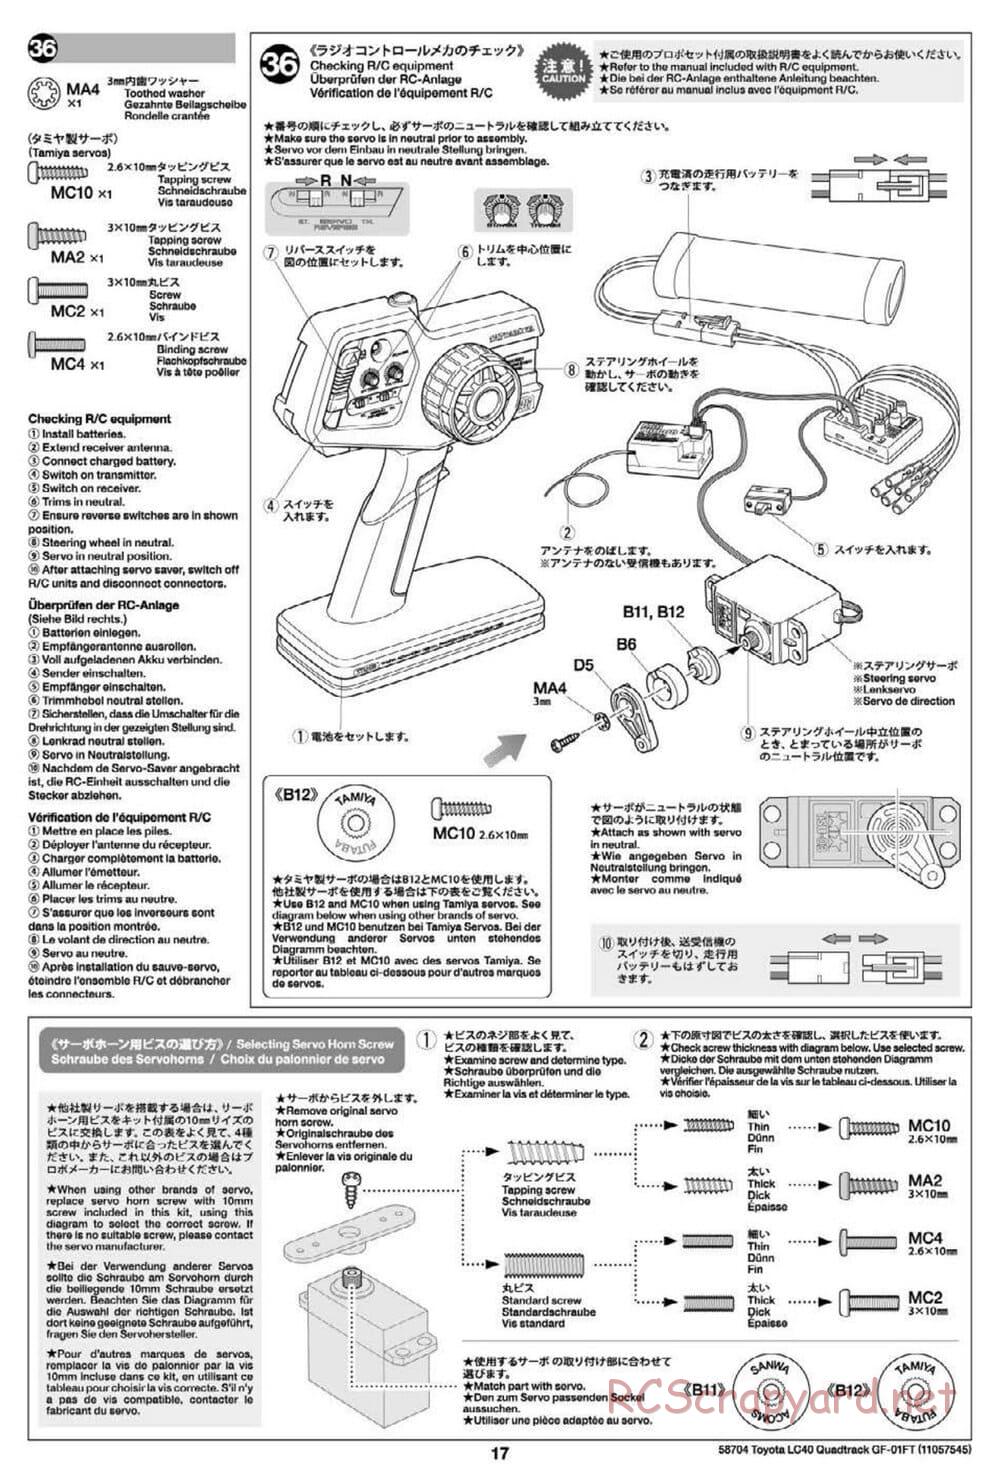 Tamiya - Toyota Land Cruiser 40 Pick-Up Quadtrack - GF-01FT Chassis - Manual - Page 17